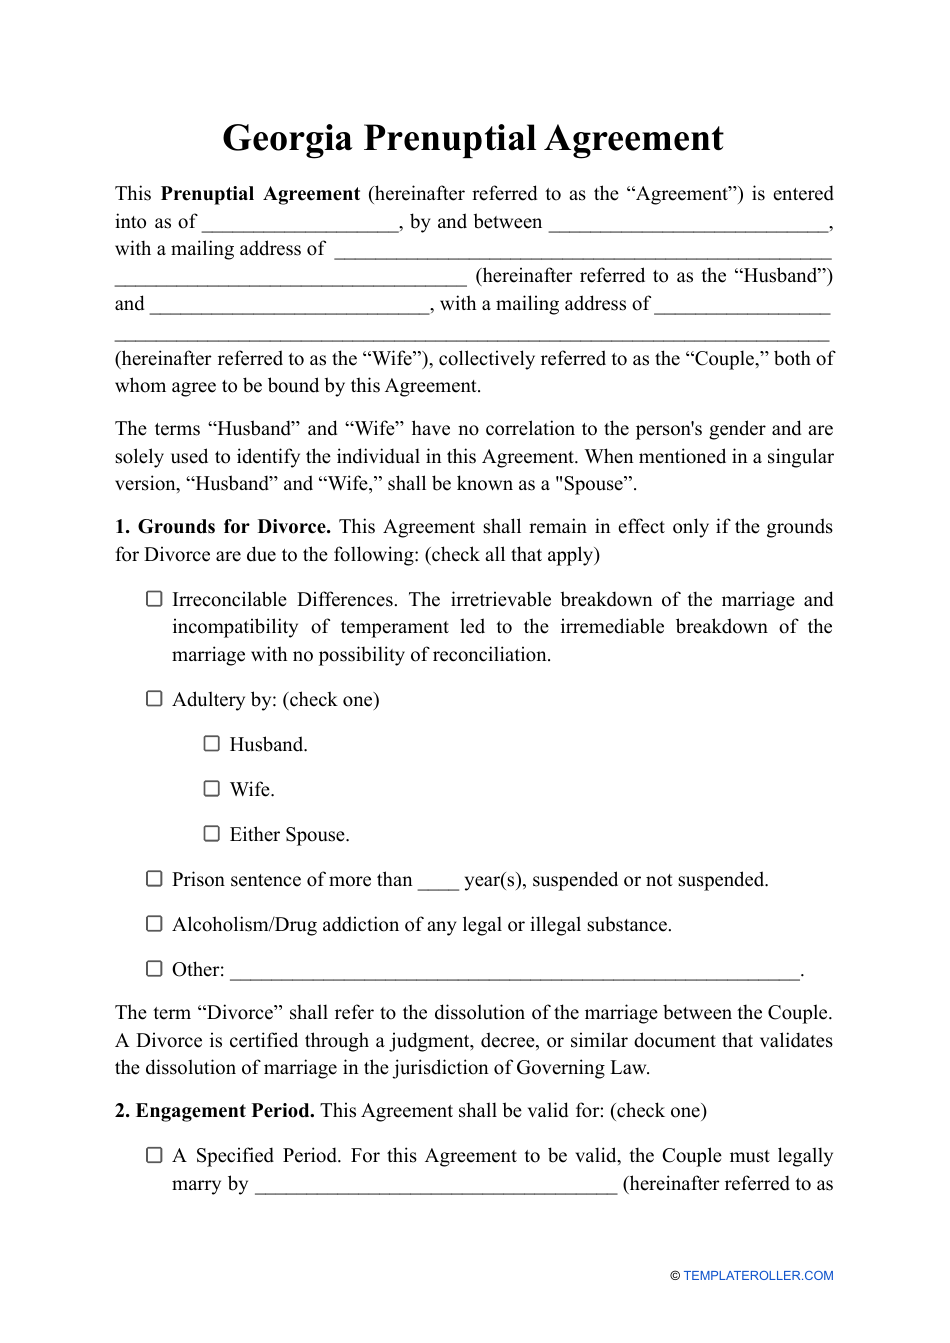 Prenuptial Agreement Template - Georgia (United States), Page 1